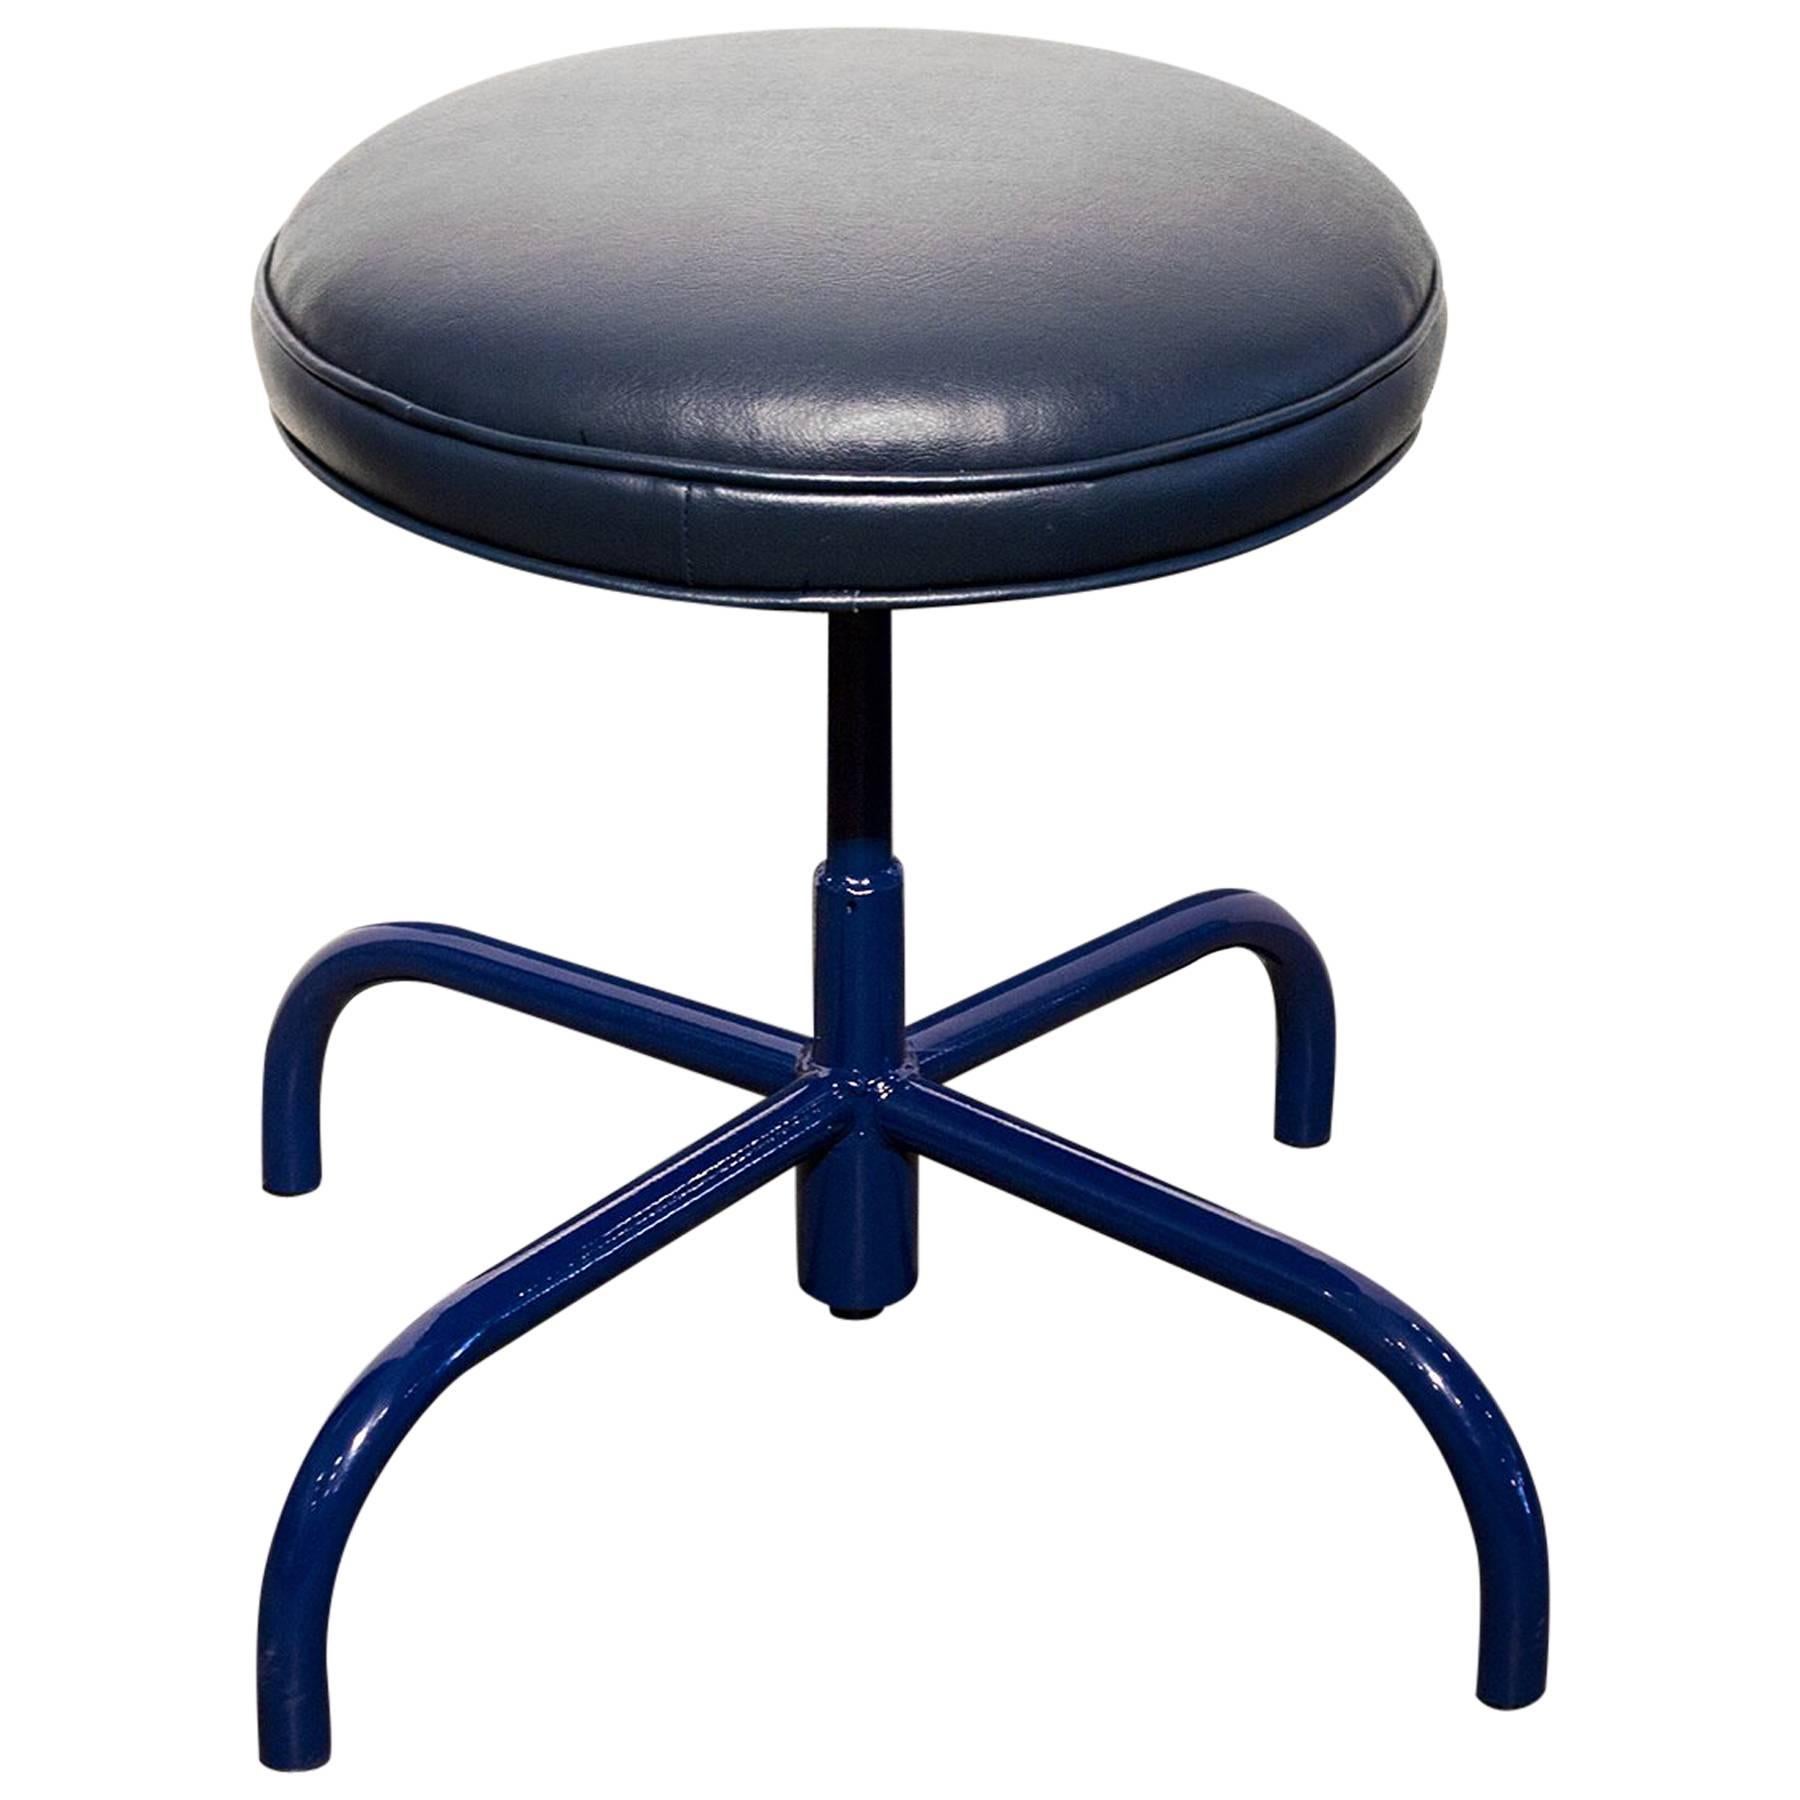 Vintage Counter Stool in Marine Blue, circa 1960s